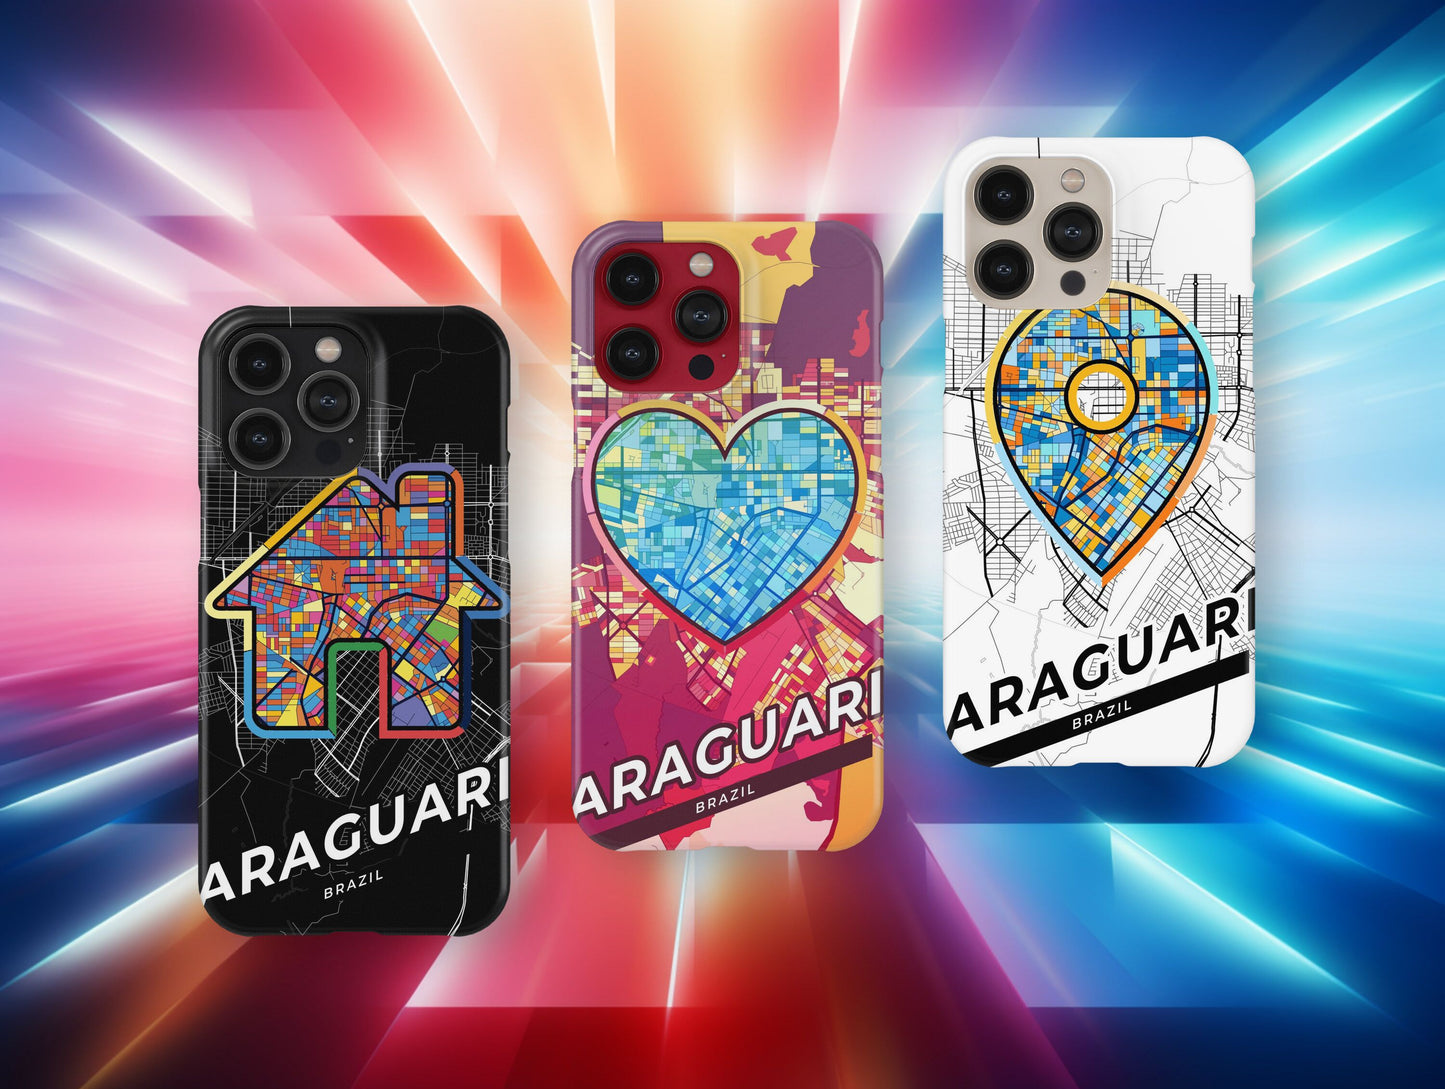 Araguari Brazil slim phone case with colorful icon. Birthday, wedding or housewarming gift. Couple match cases.